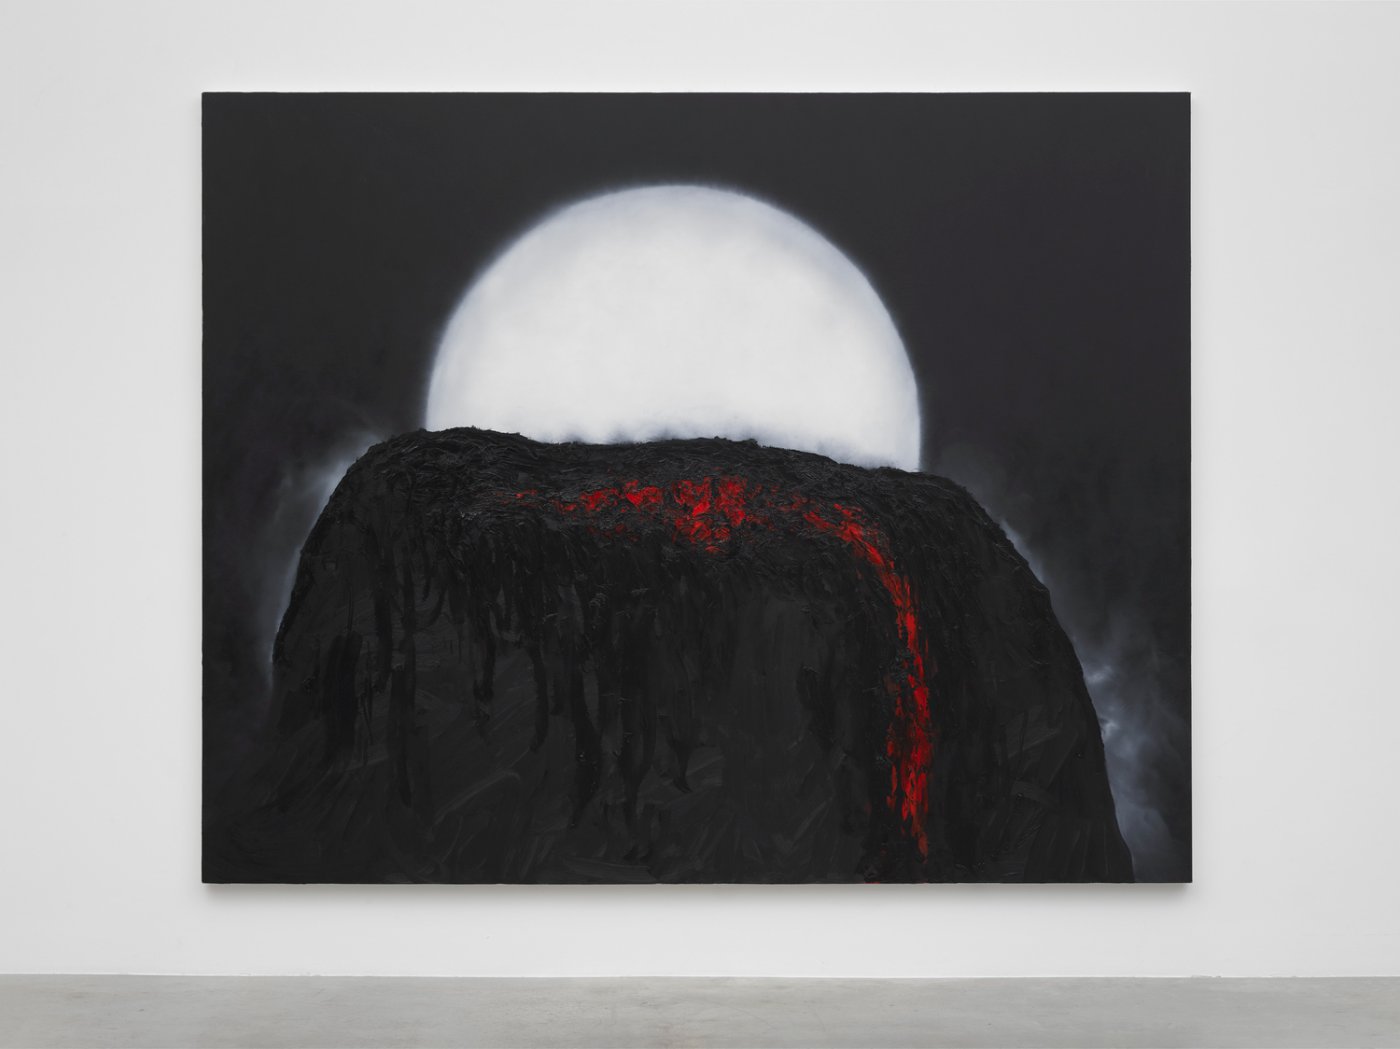 Anish Kapoor, Oh Mother, Tell Me My Life Again, 2021